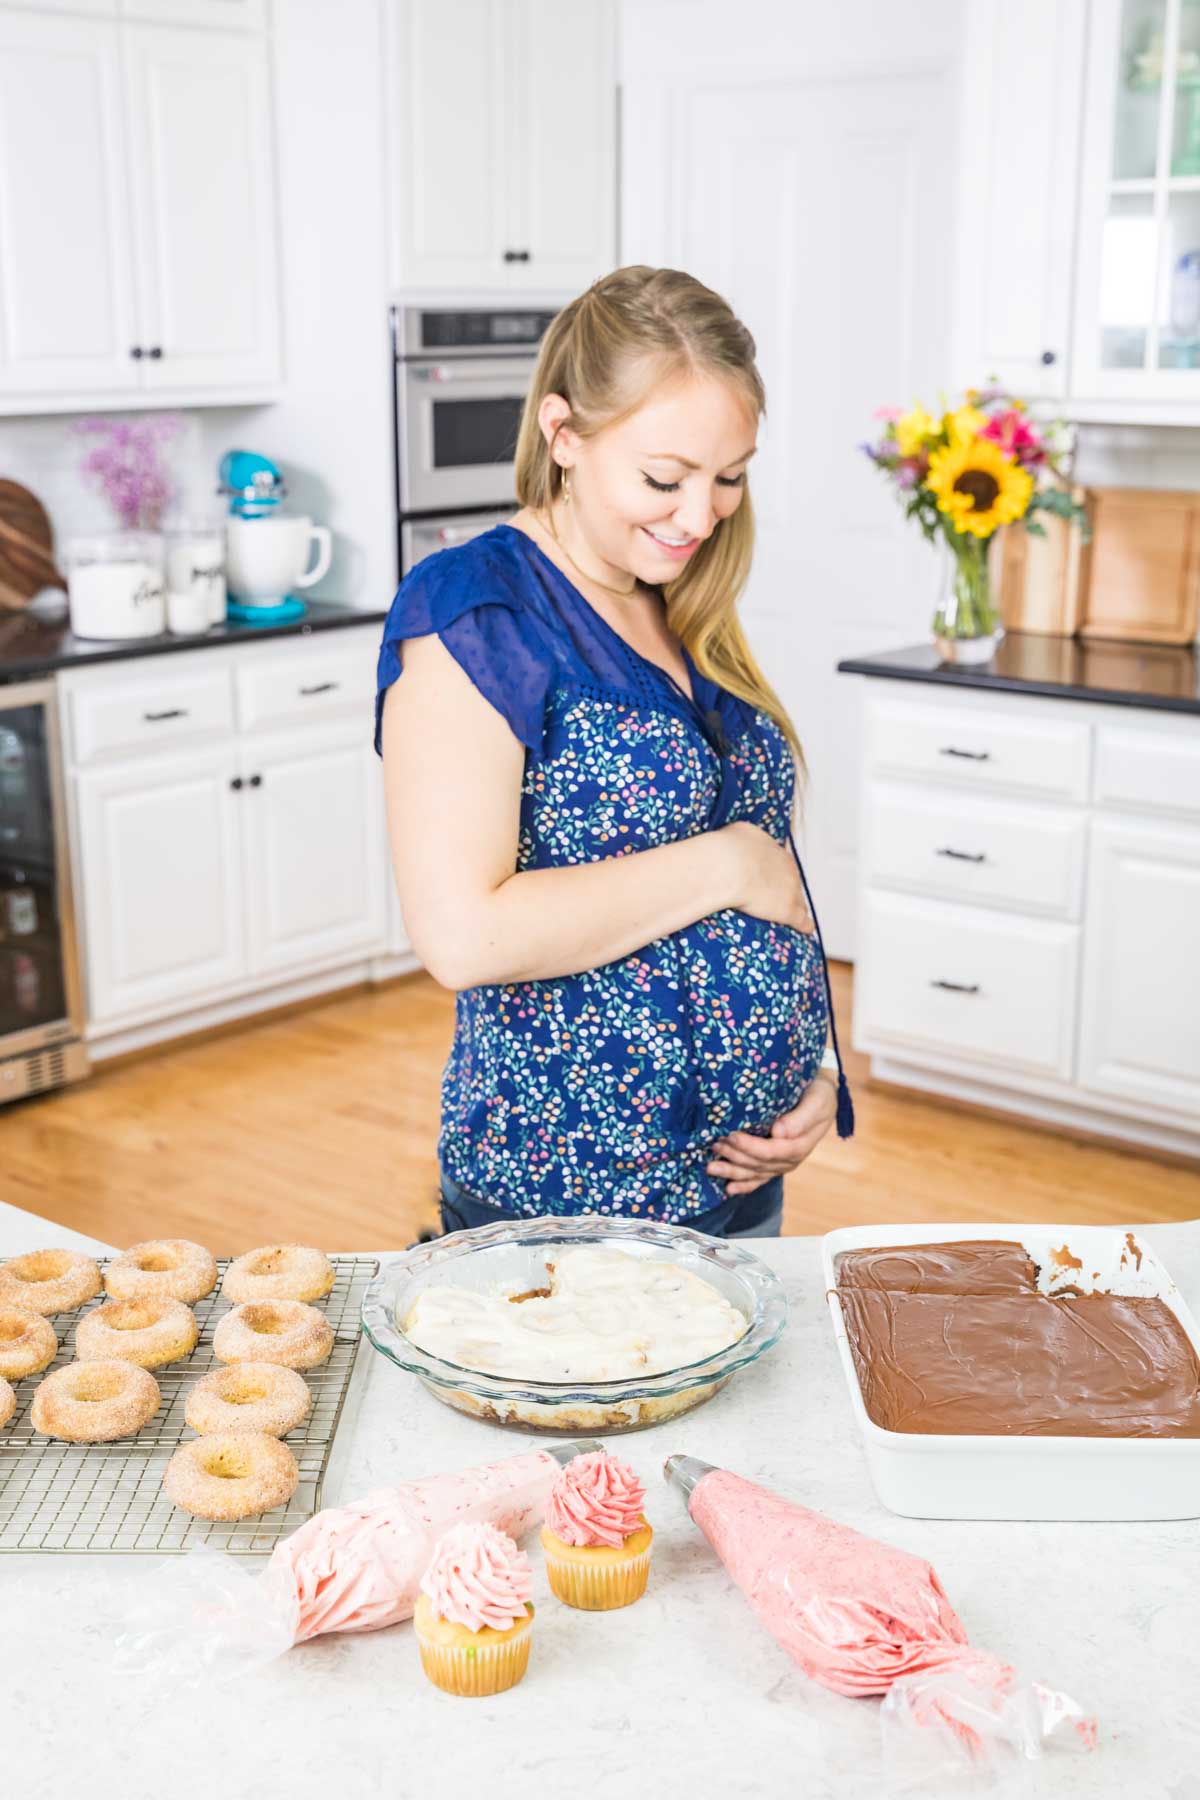 The author in a blue shirt holding her pregnant belly in the kitchen. On the counter in front of her is an array of desserts